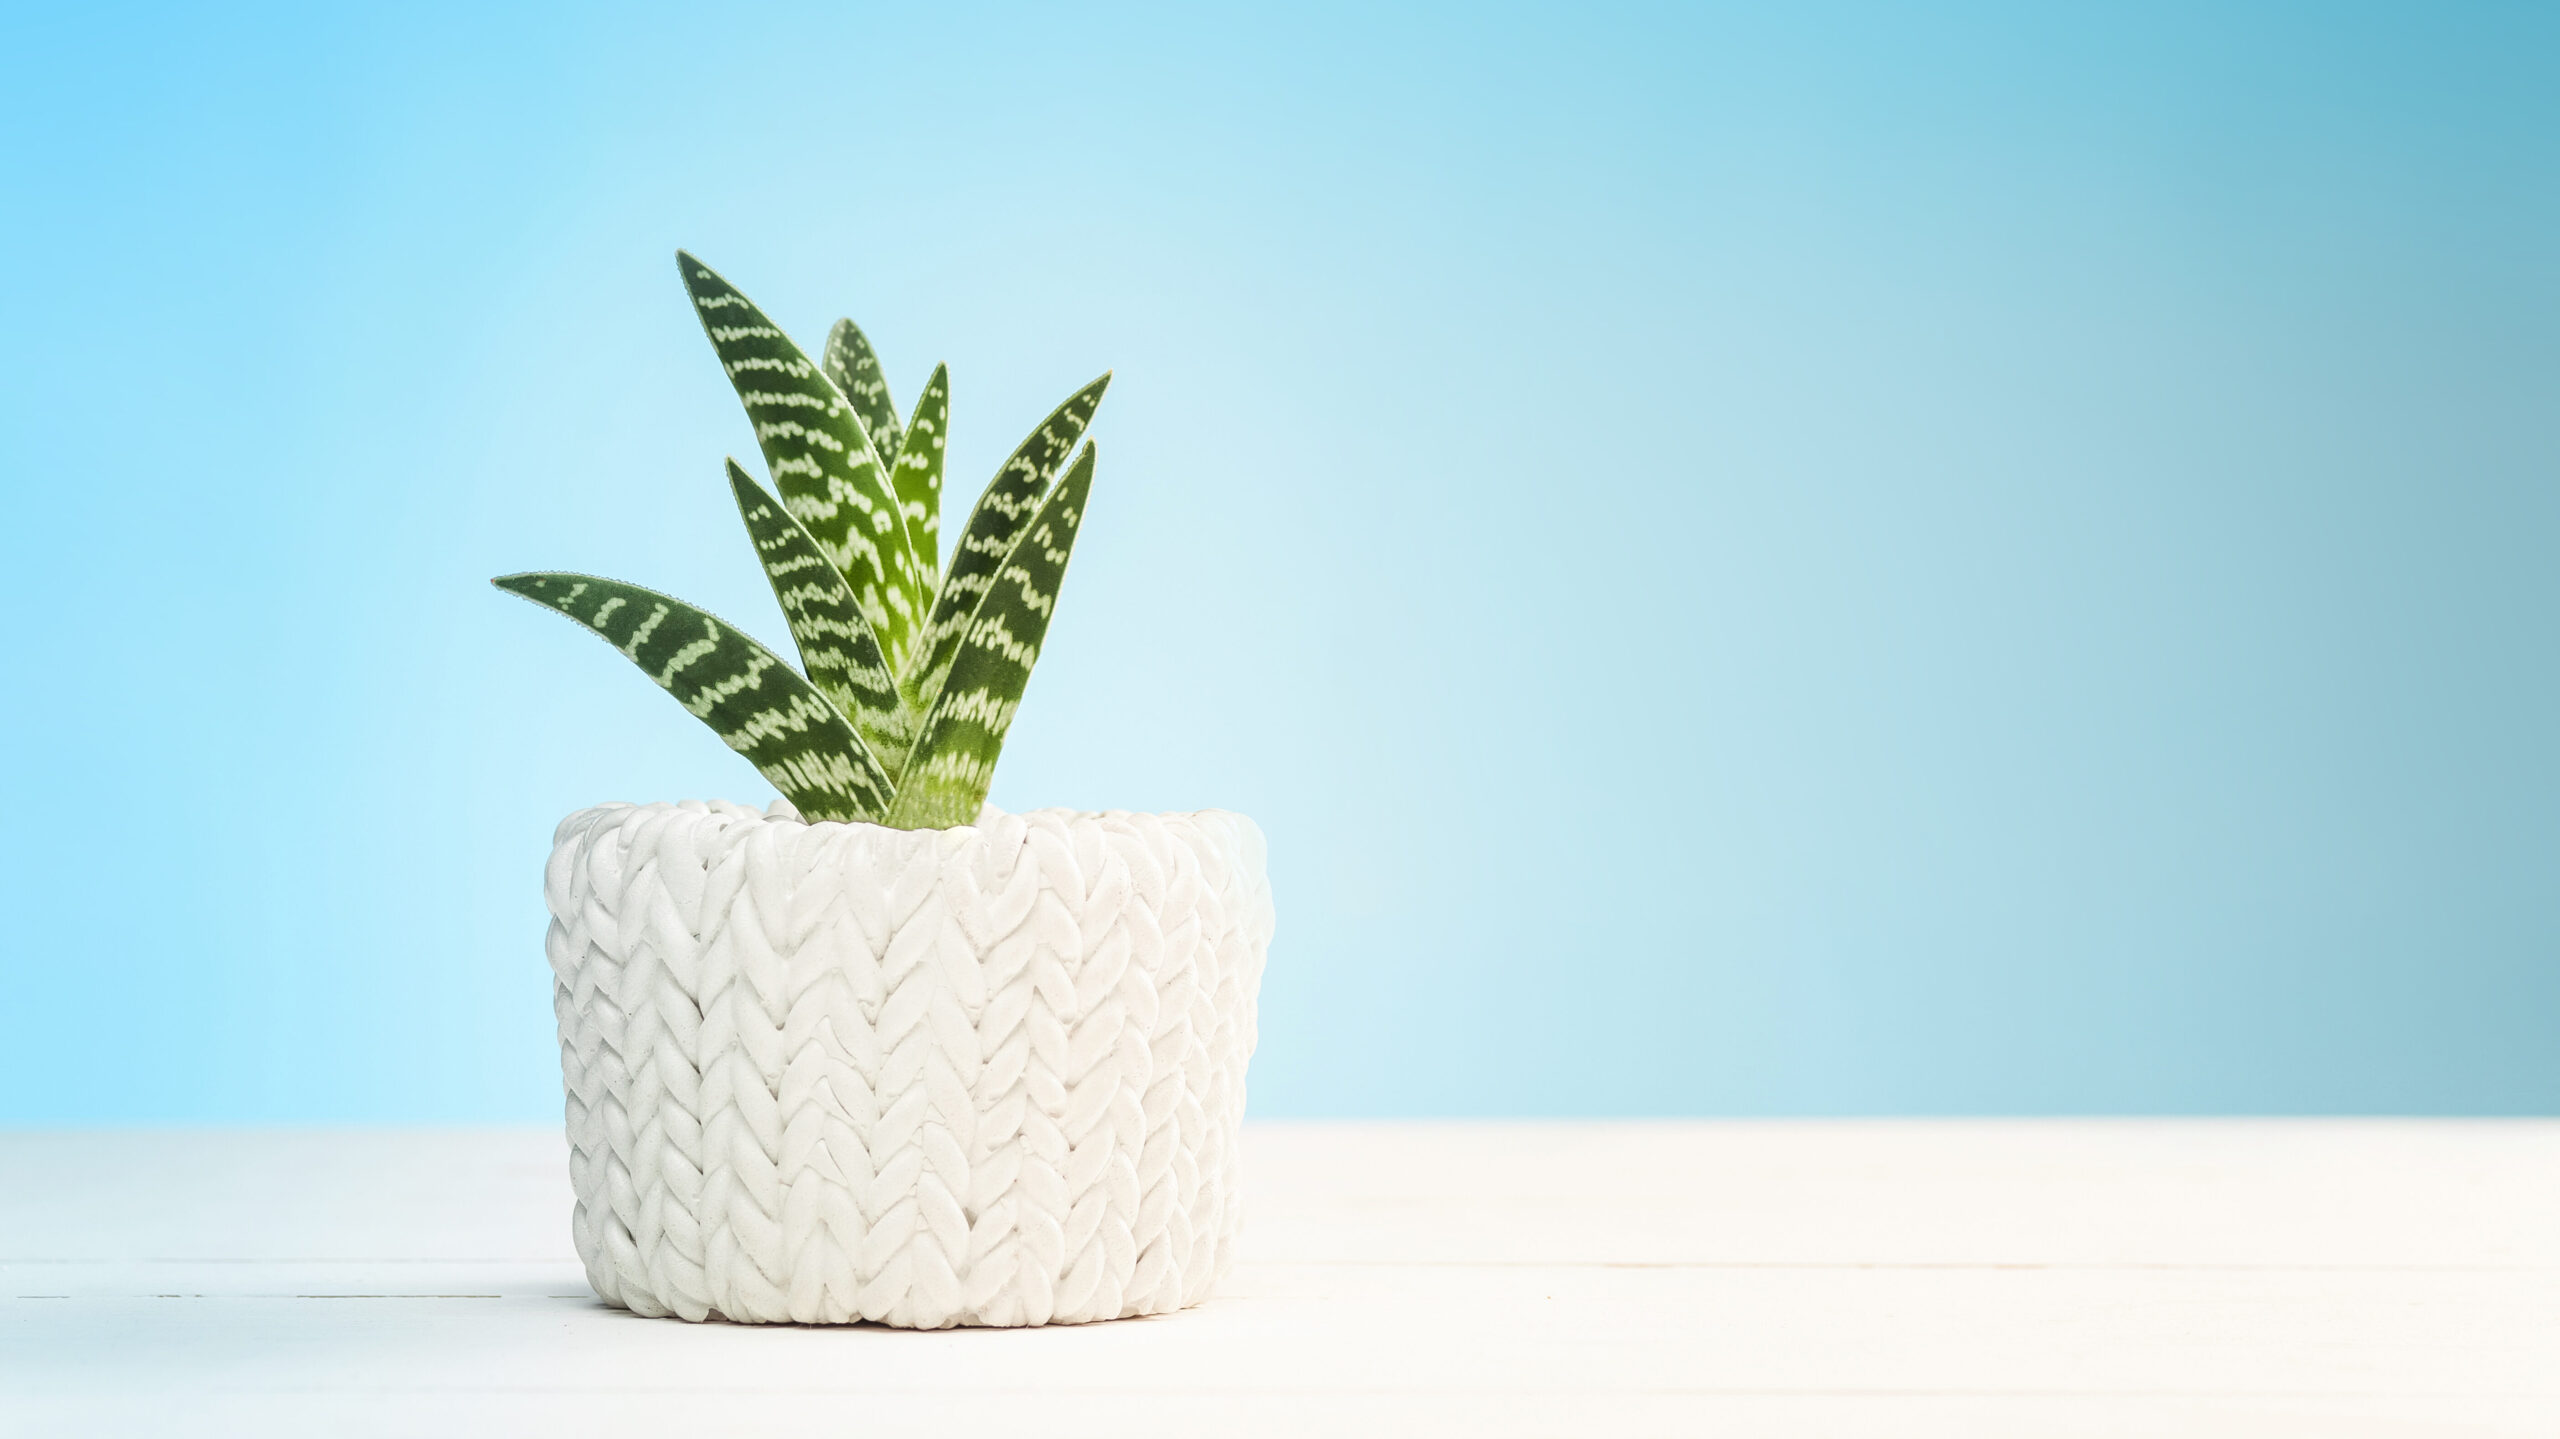 Beyond Decor: The 7 Best Houseplants and the Life Lessons They Impart